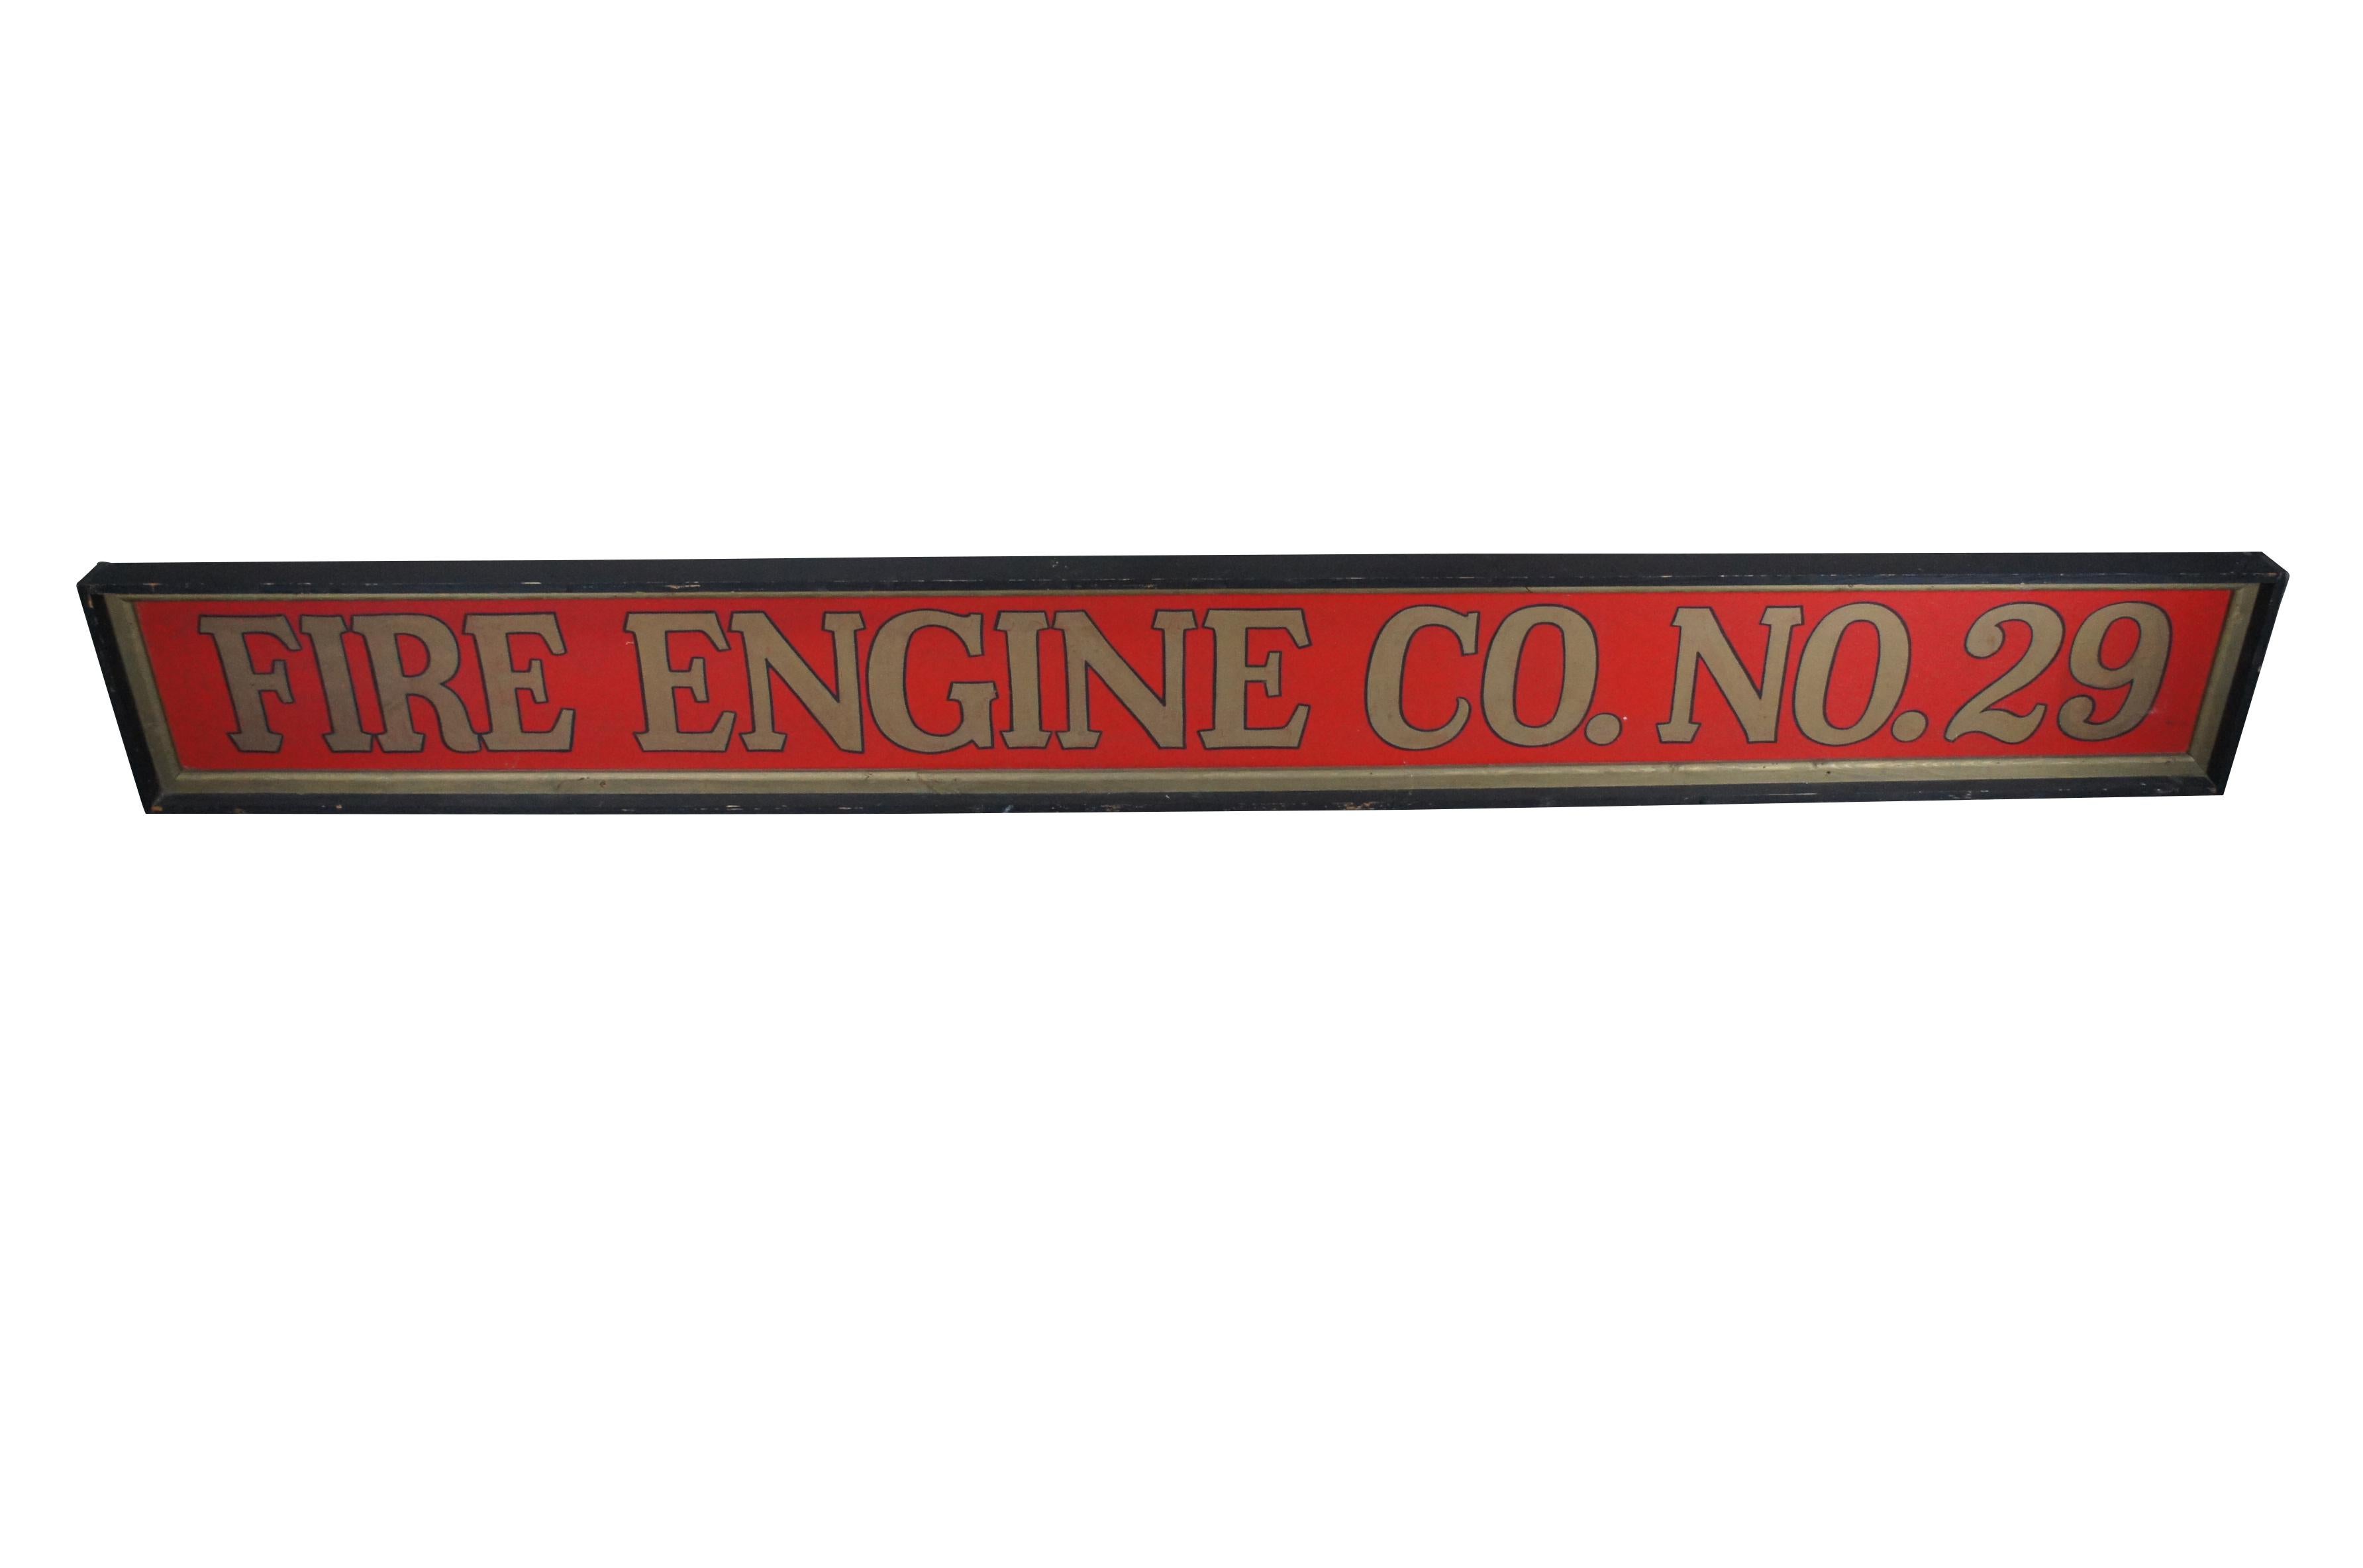 A very large and impressive vintage Fire Engine Co No. 29 ad sign.  Hand painted on wood, originating from Dayton, Ohio and recently displayed at The Spaghetti Warehouse.  Firehouse, man cave, garage.

Dimensions:
145 1/2